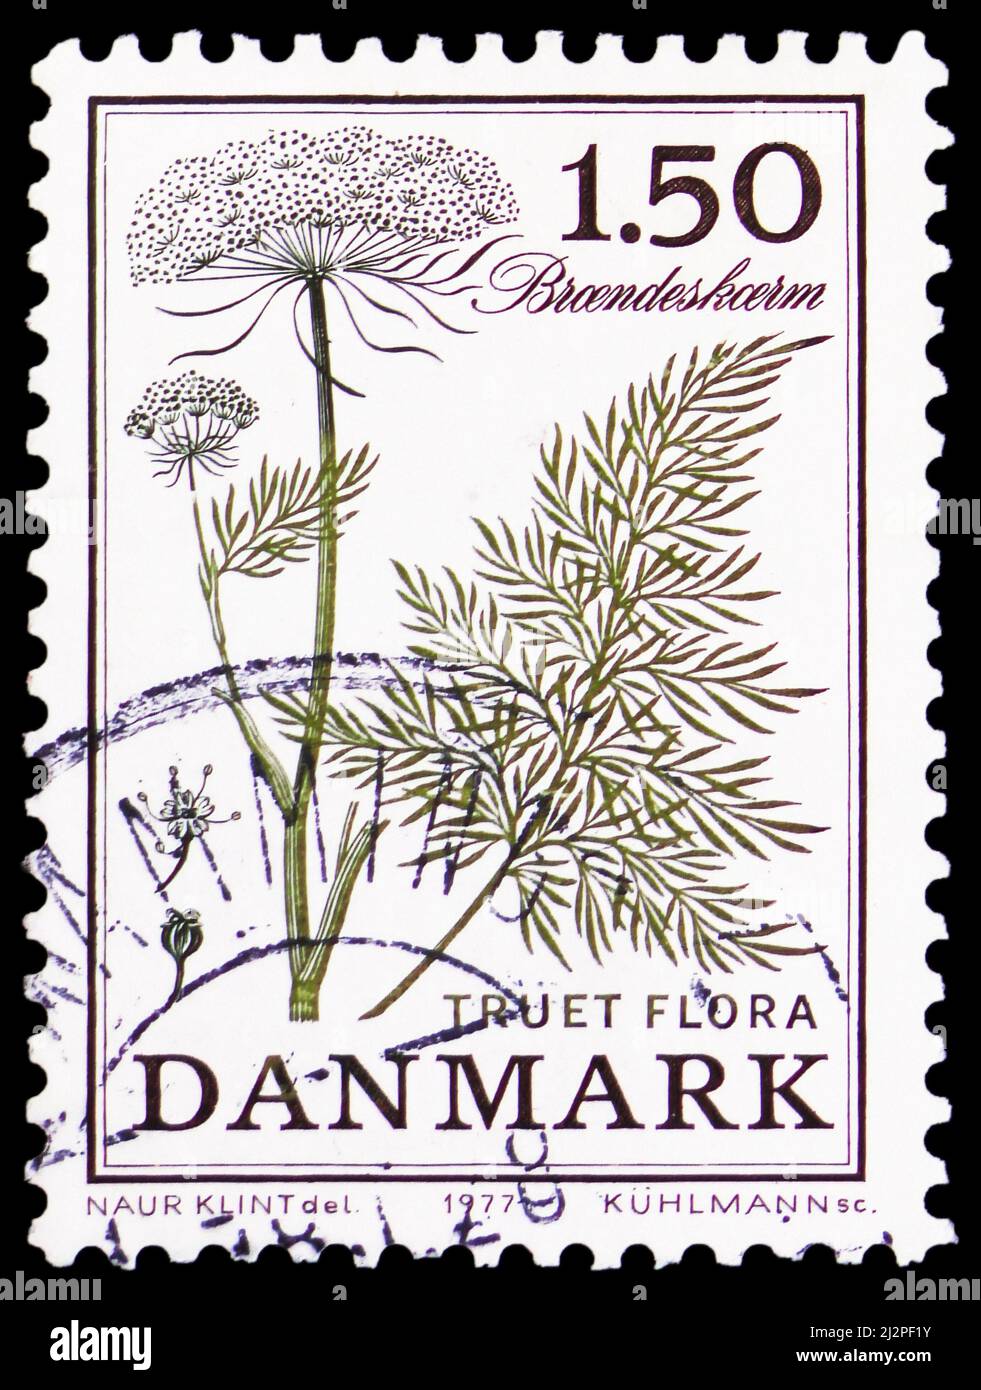 MOSCOW, RUSSIA - MARCH 13, 2022: Postage stamp printed in Denmark shows Cnidium dubium, Threatened flora serie, circa 1977 Stock Photo